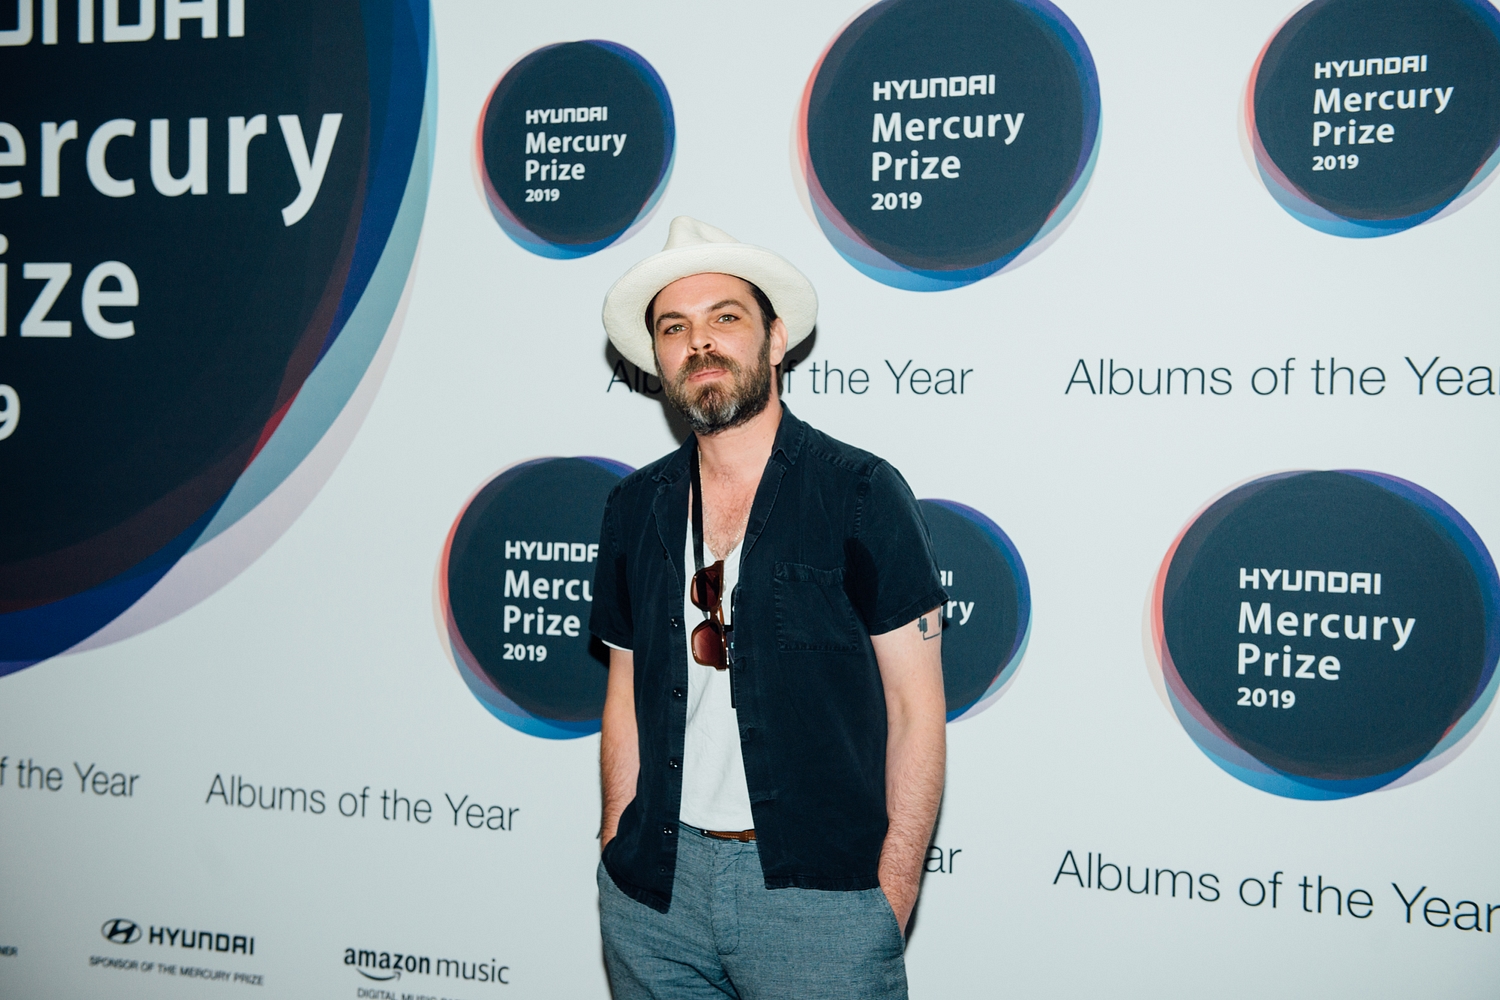 “I’m fully expecting there to be a bit of fisticuffs” - Gaz Coombes talks judging the 2019 Hyundai Mercury Prize